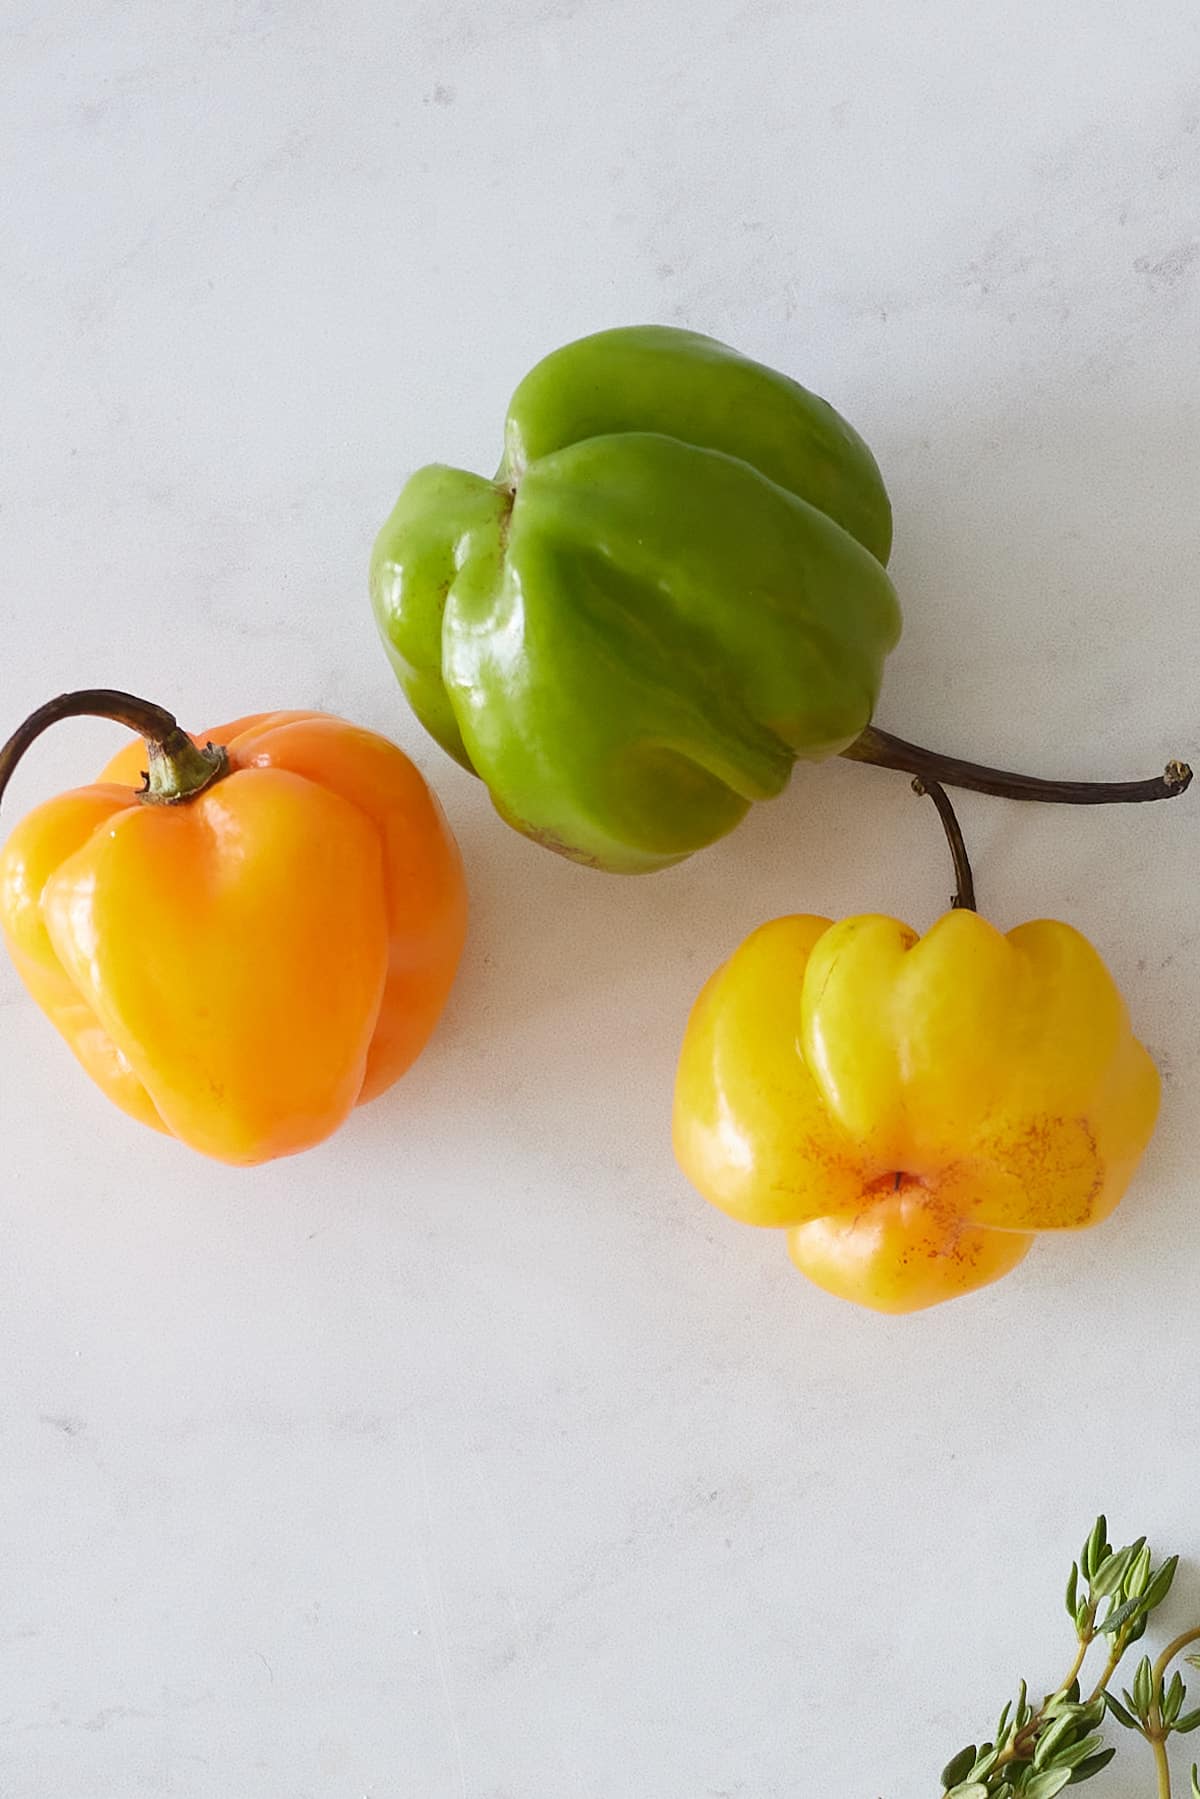 scotch bonnet peppers on white background